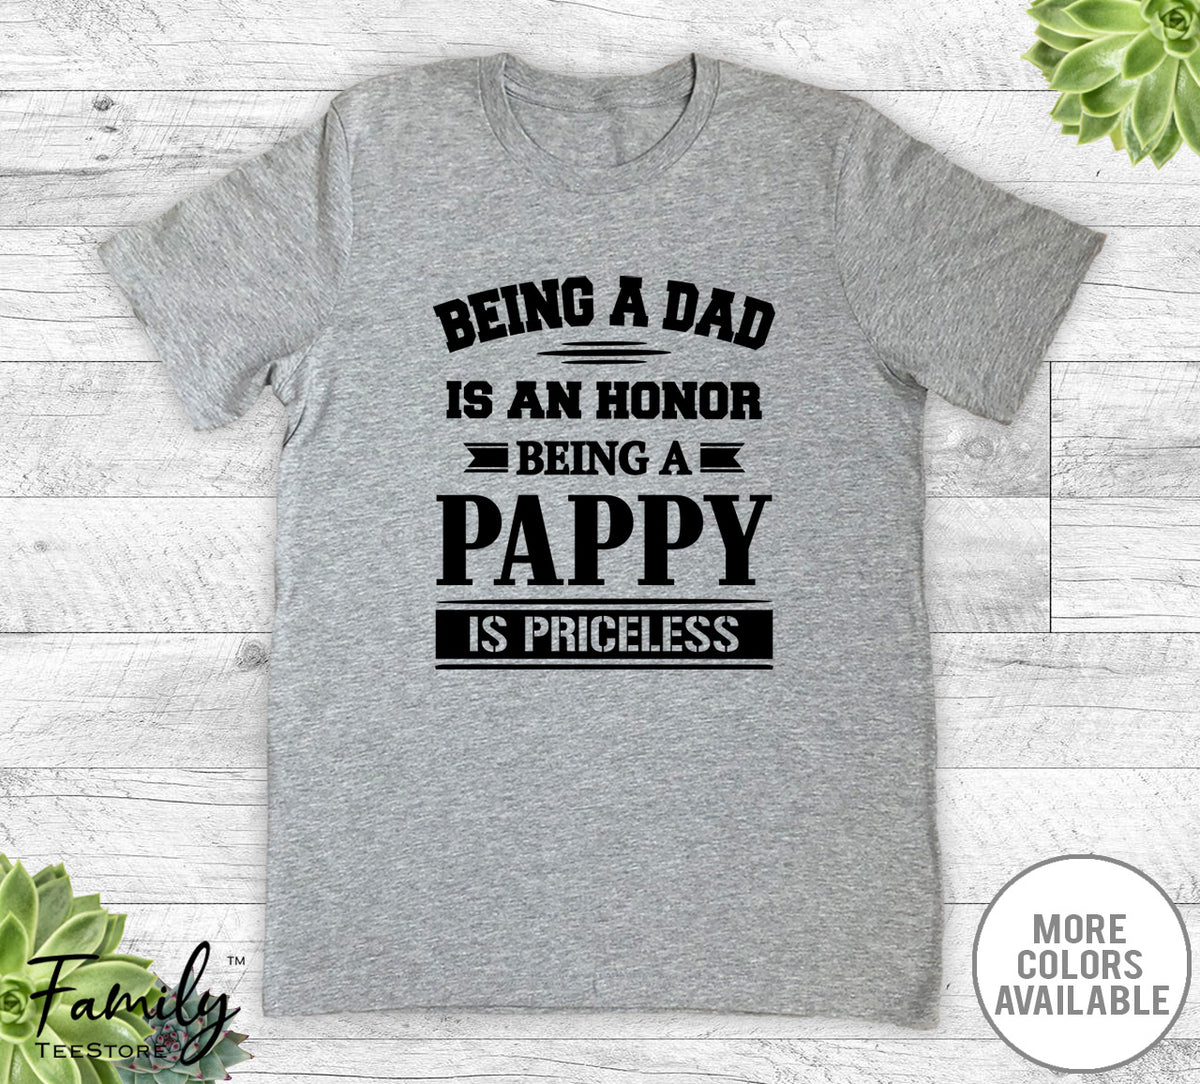 Being A Dad Is An Honor Being A Pappy Is Priceless - Unisex T-shirt - Pappy Shirt - Pappy Gift - familyteeprints